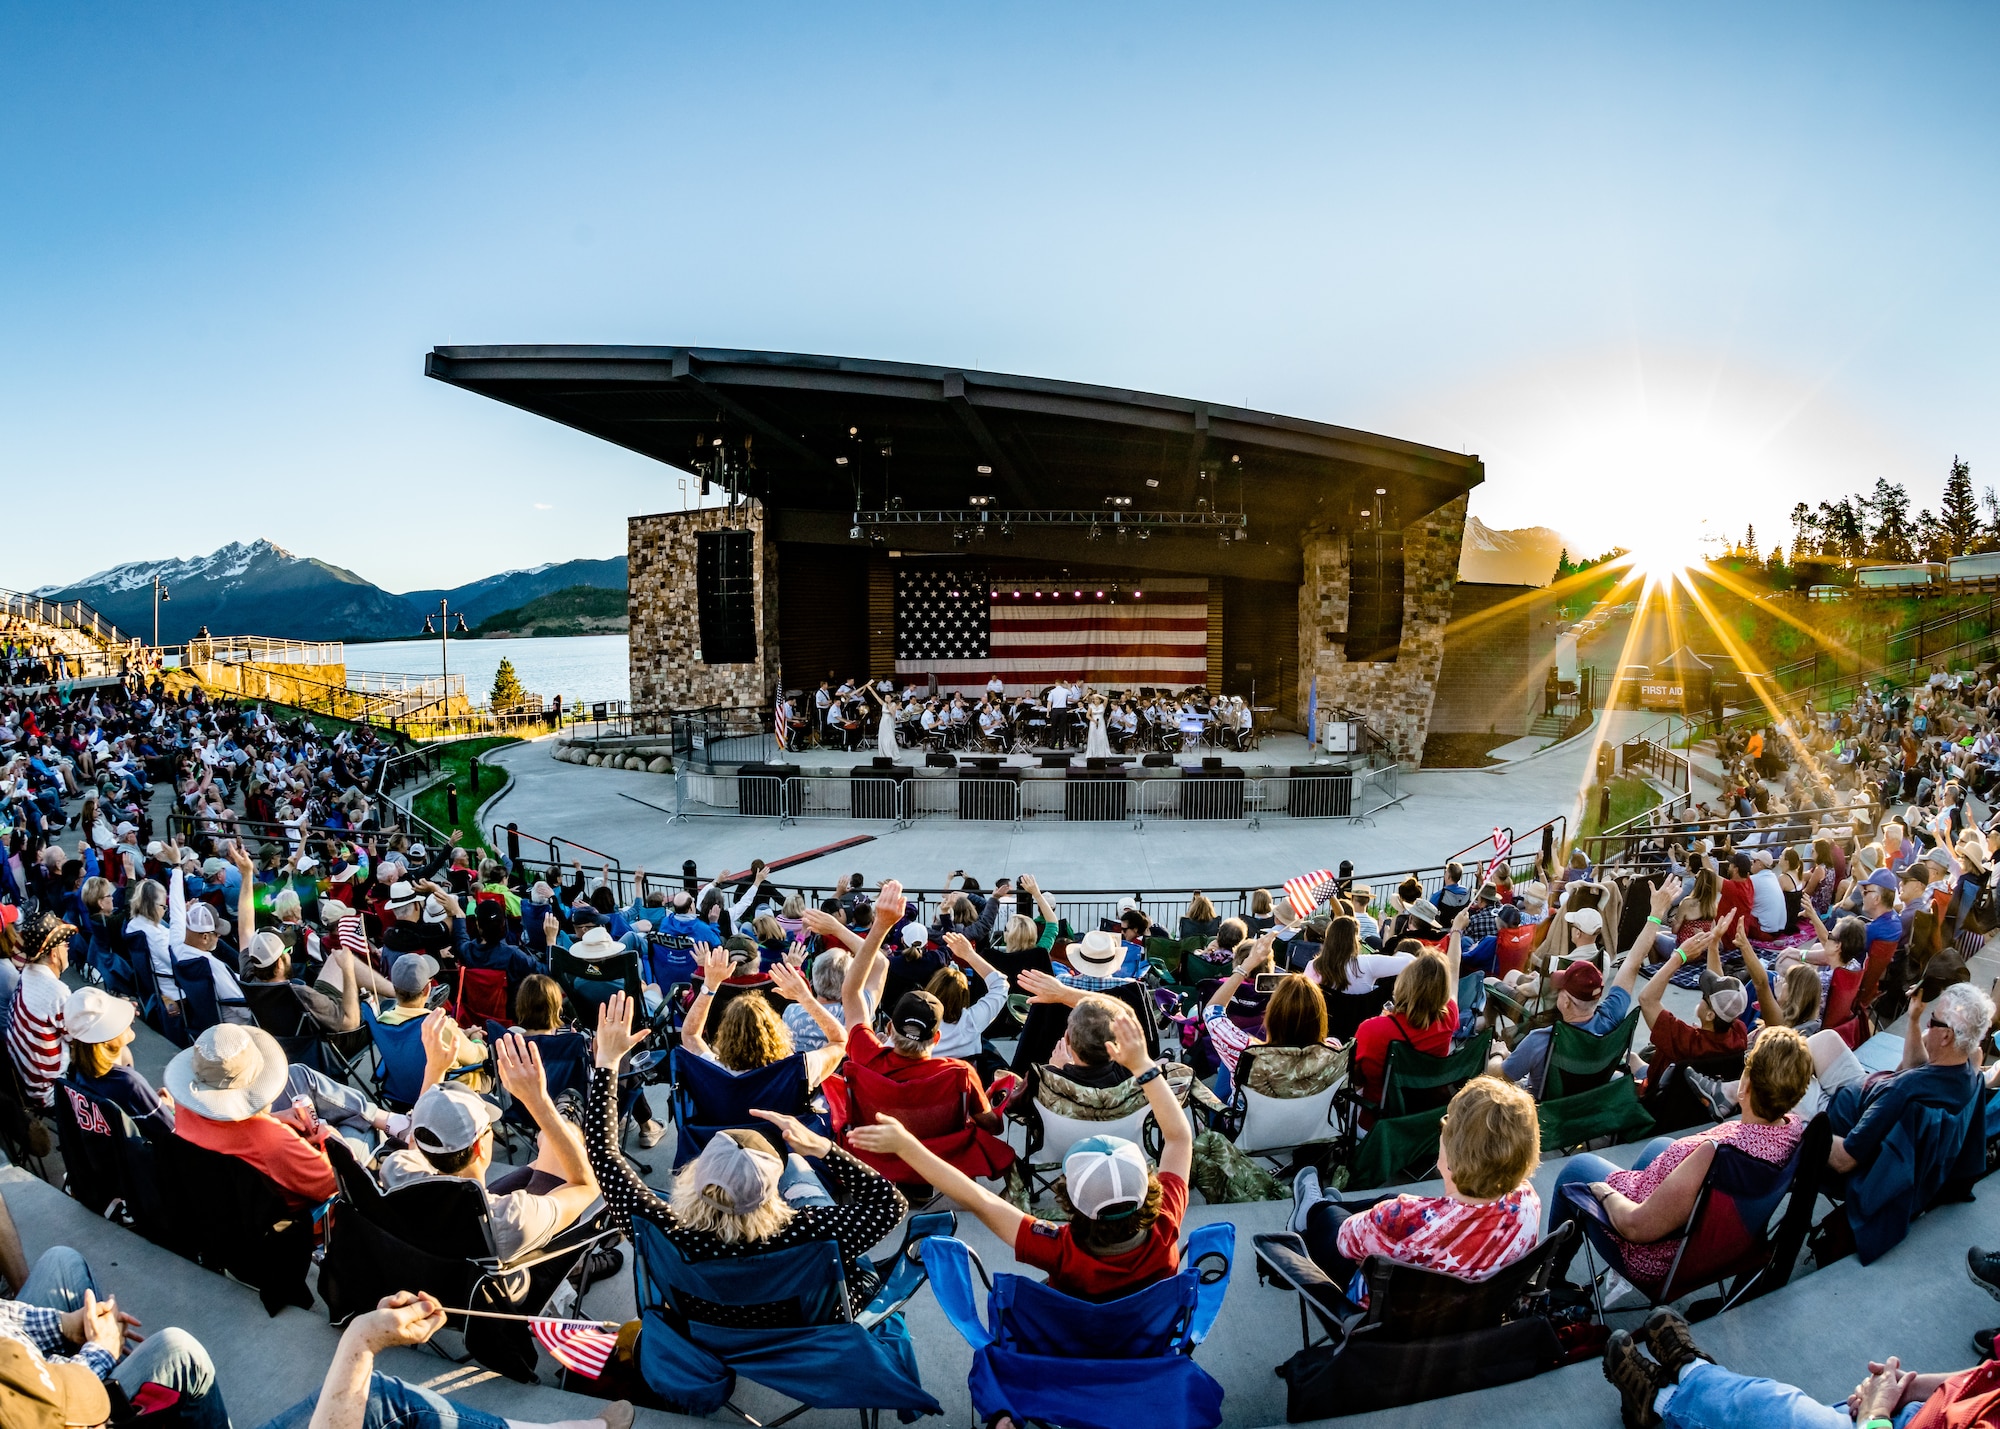 A crowd of 6,000 celebrated the Fourth of July with the Air Force Academy Band at the Dillon Amphitheater in Dillon, CO in 2019.  The crowd waves their arms and small flags in the air as the band plays on a large stage with an American flag backdrop, surrounded by blue snowy mountains, a broad reservoir, and the golden setting sun. Photo by Jenise Jensen.